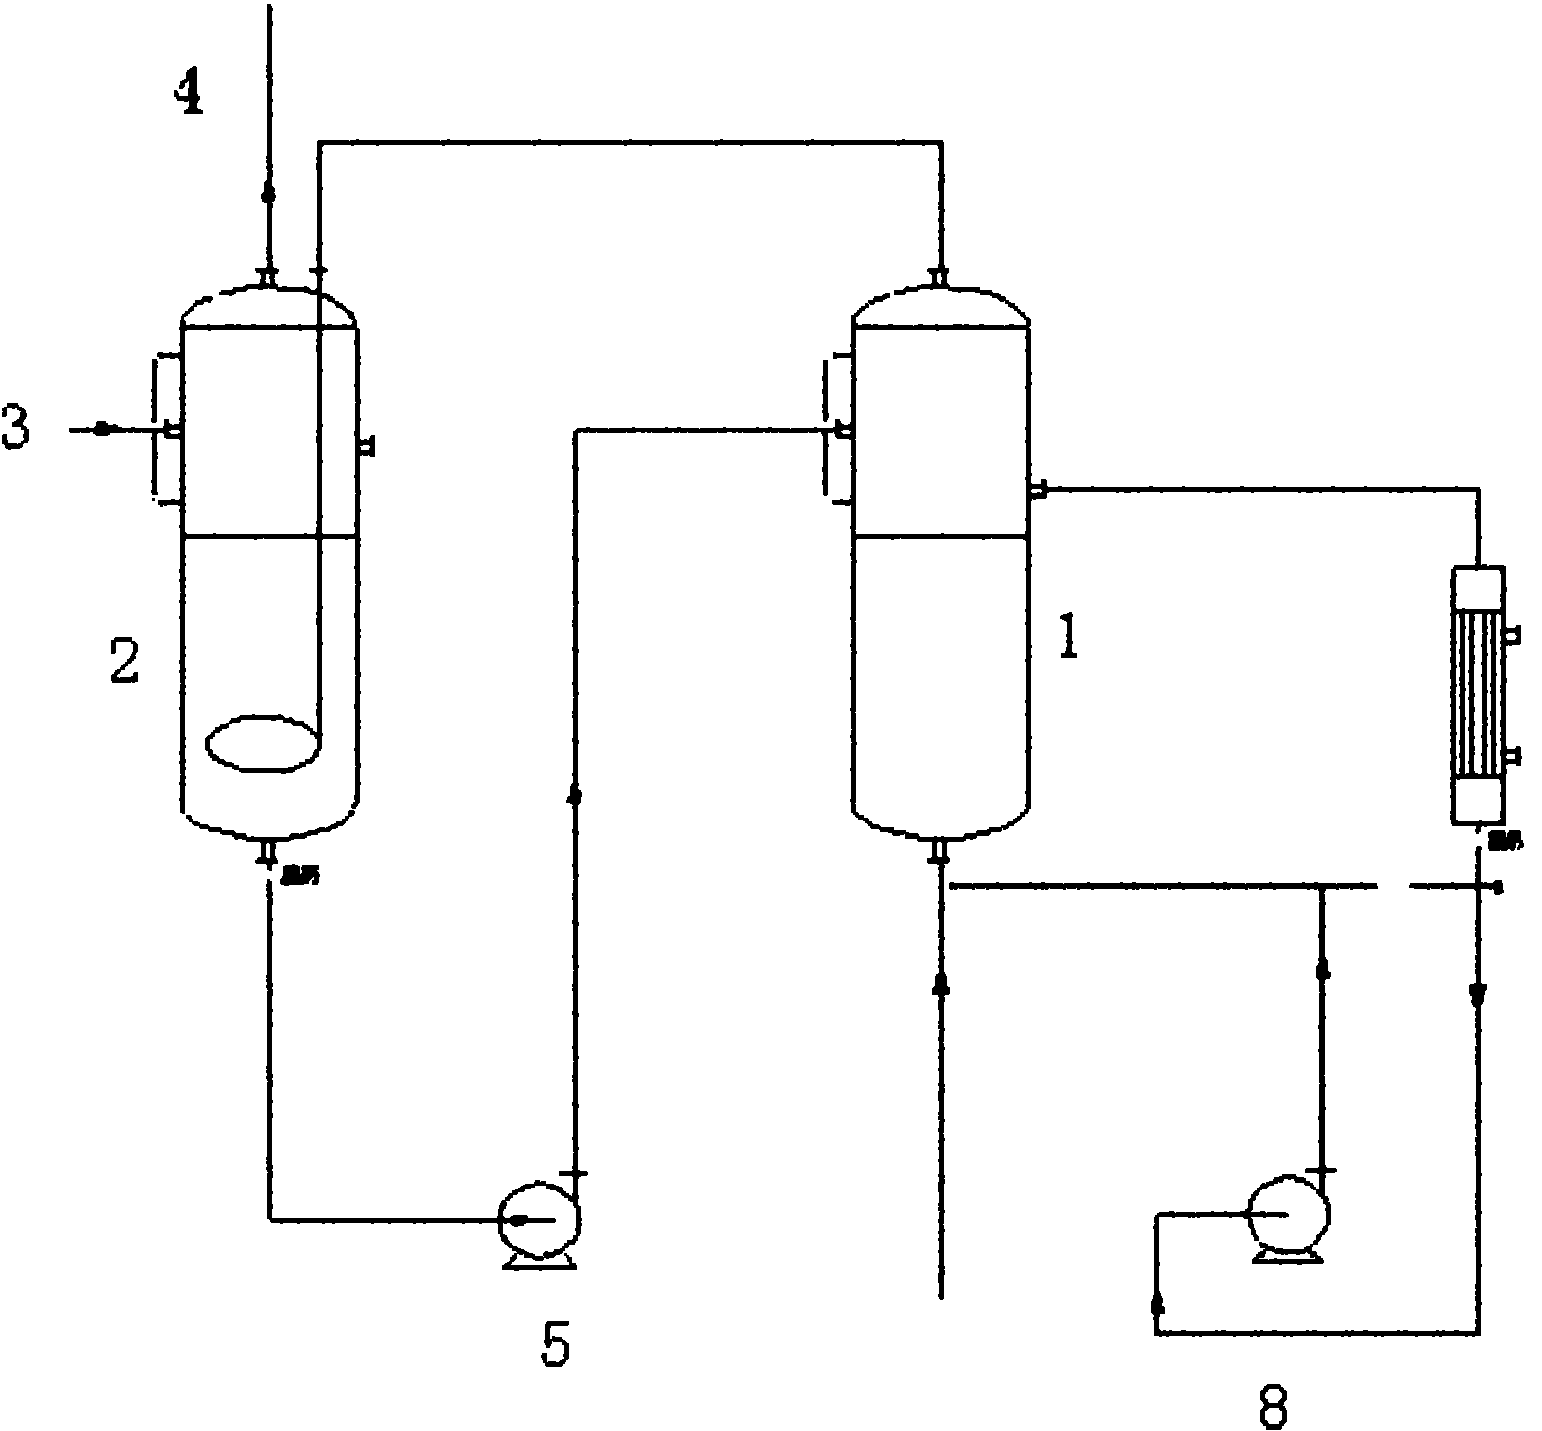 Dechloridation device and process in chlorinated paraffin production process